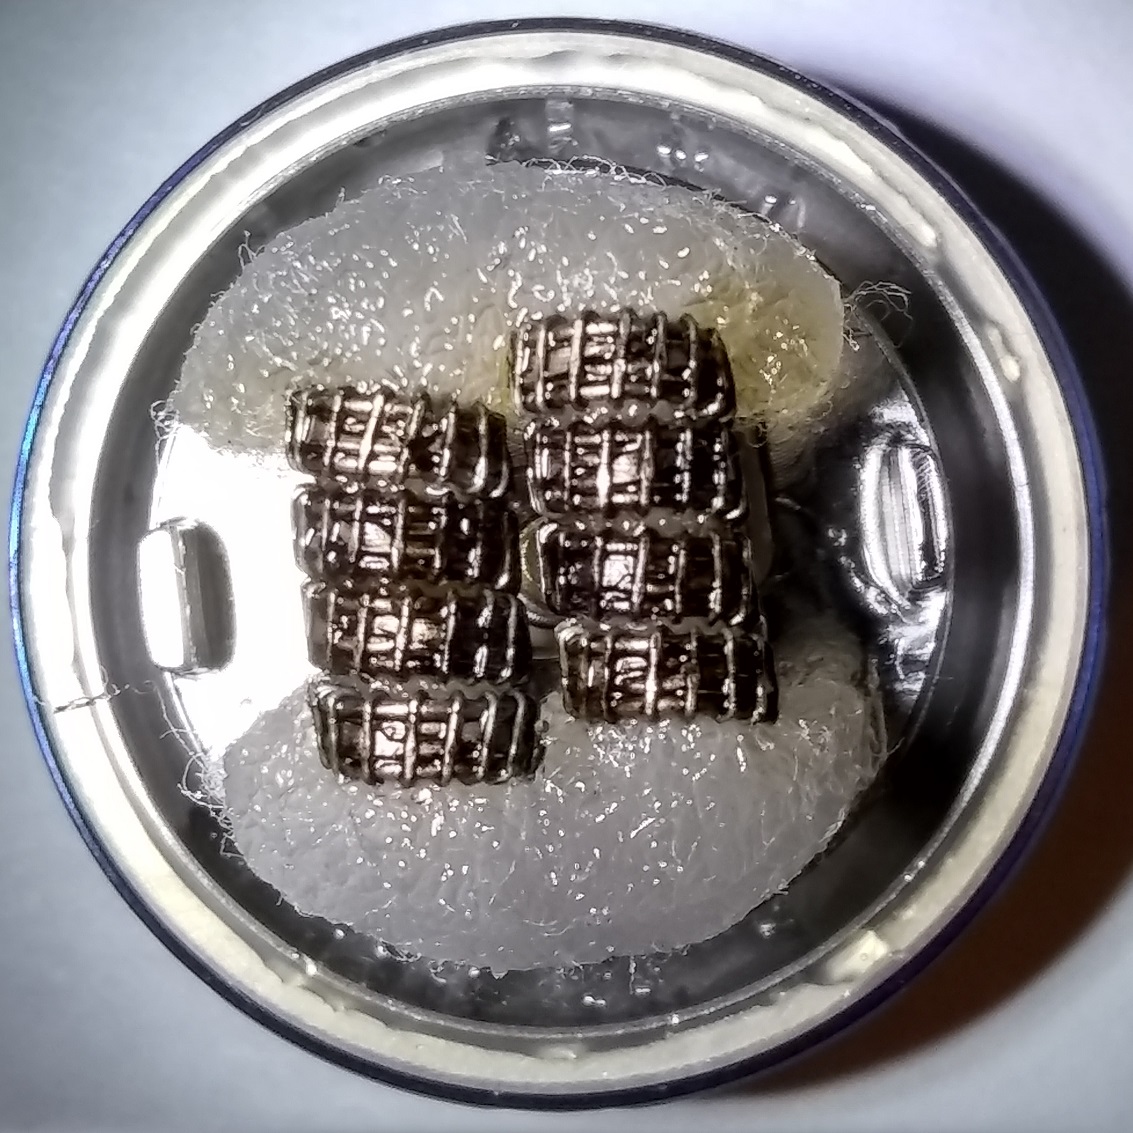 Geekvape Framed Staple Spaced 0.1Ω Dual Coil Build Top View